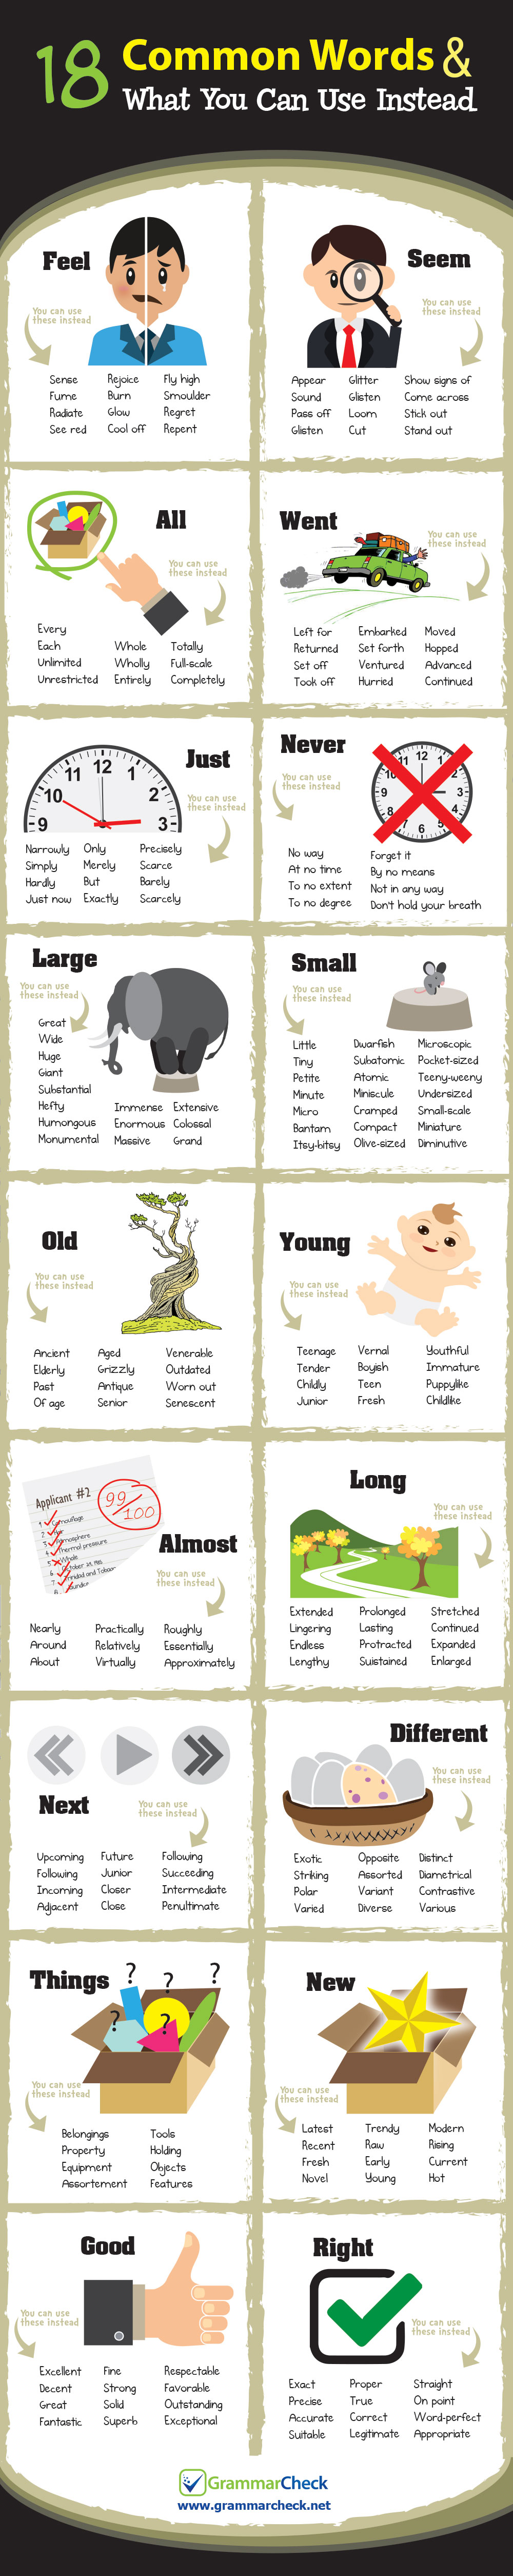 18 Common Words & What You Can Use Instead (Infographic)